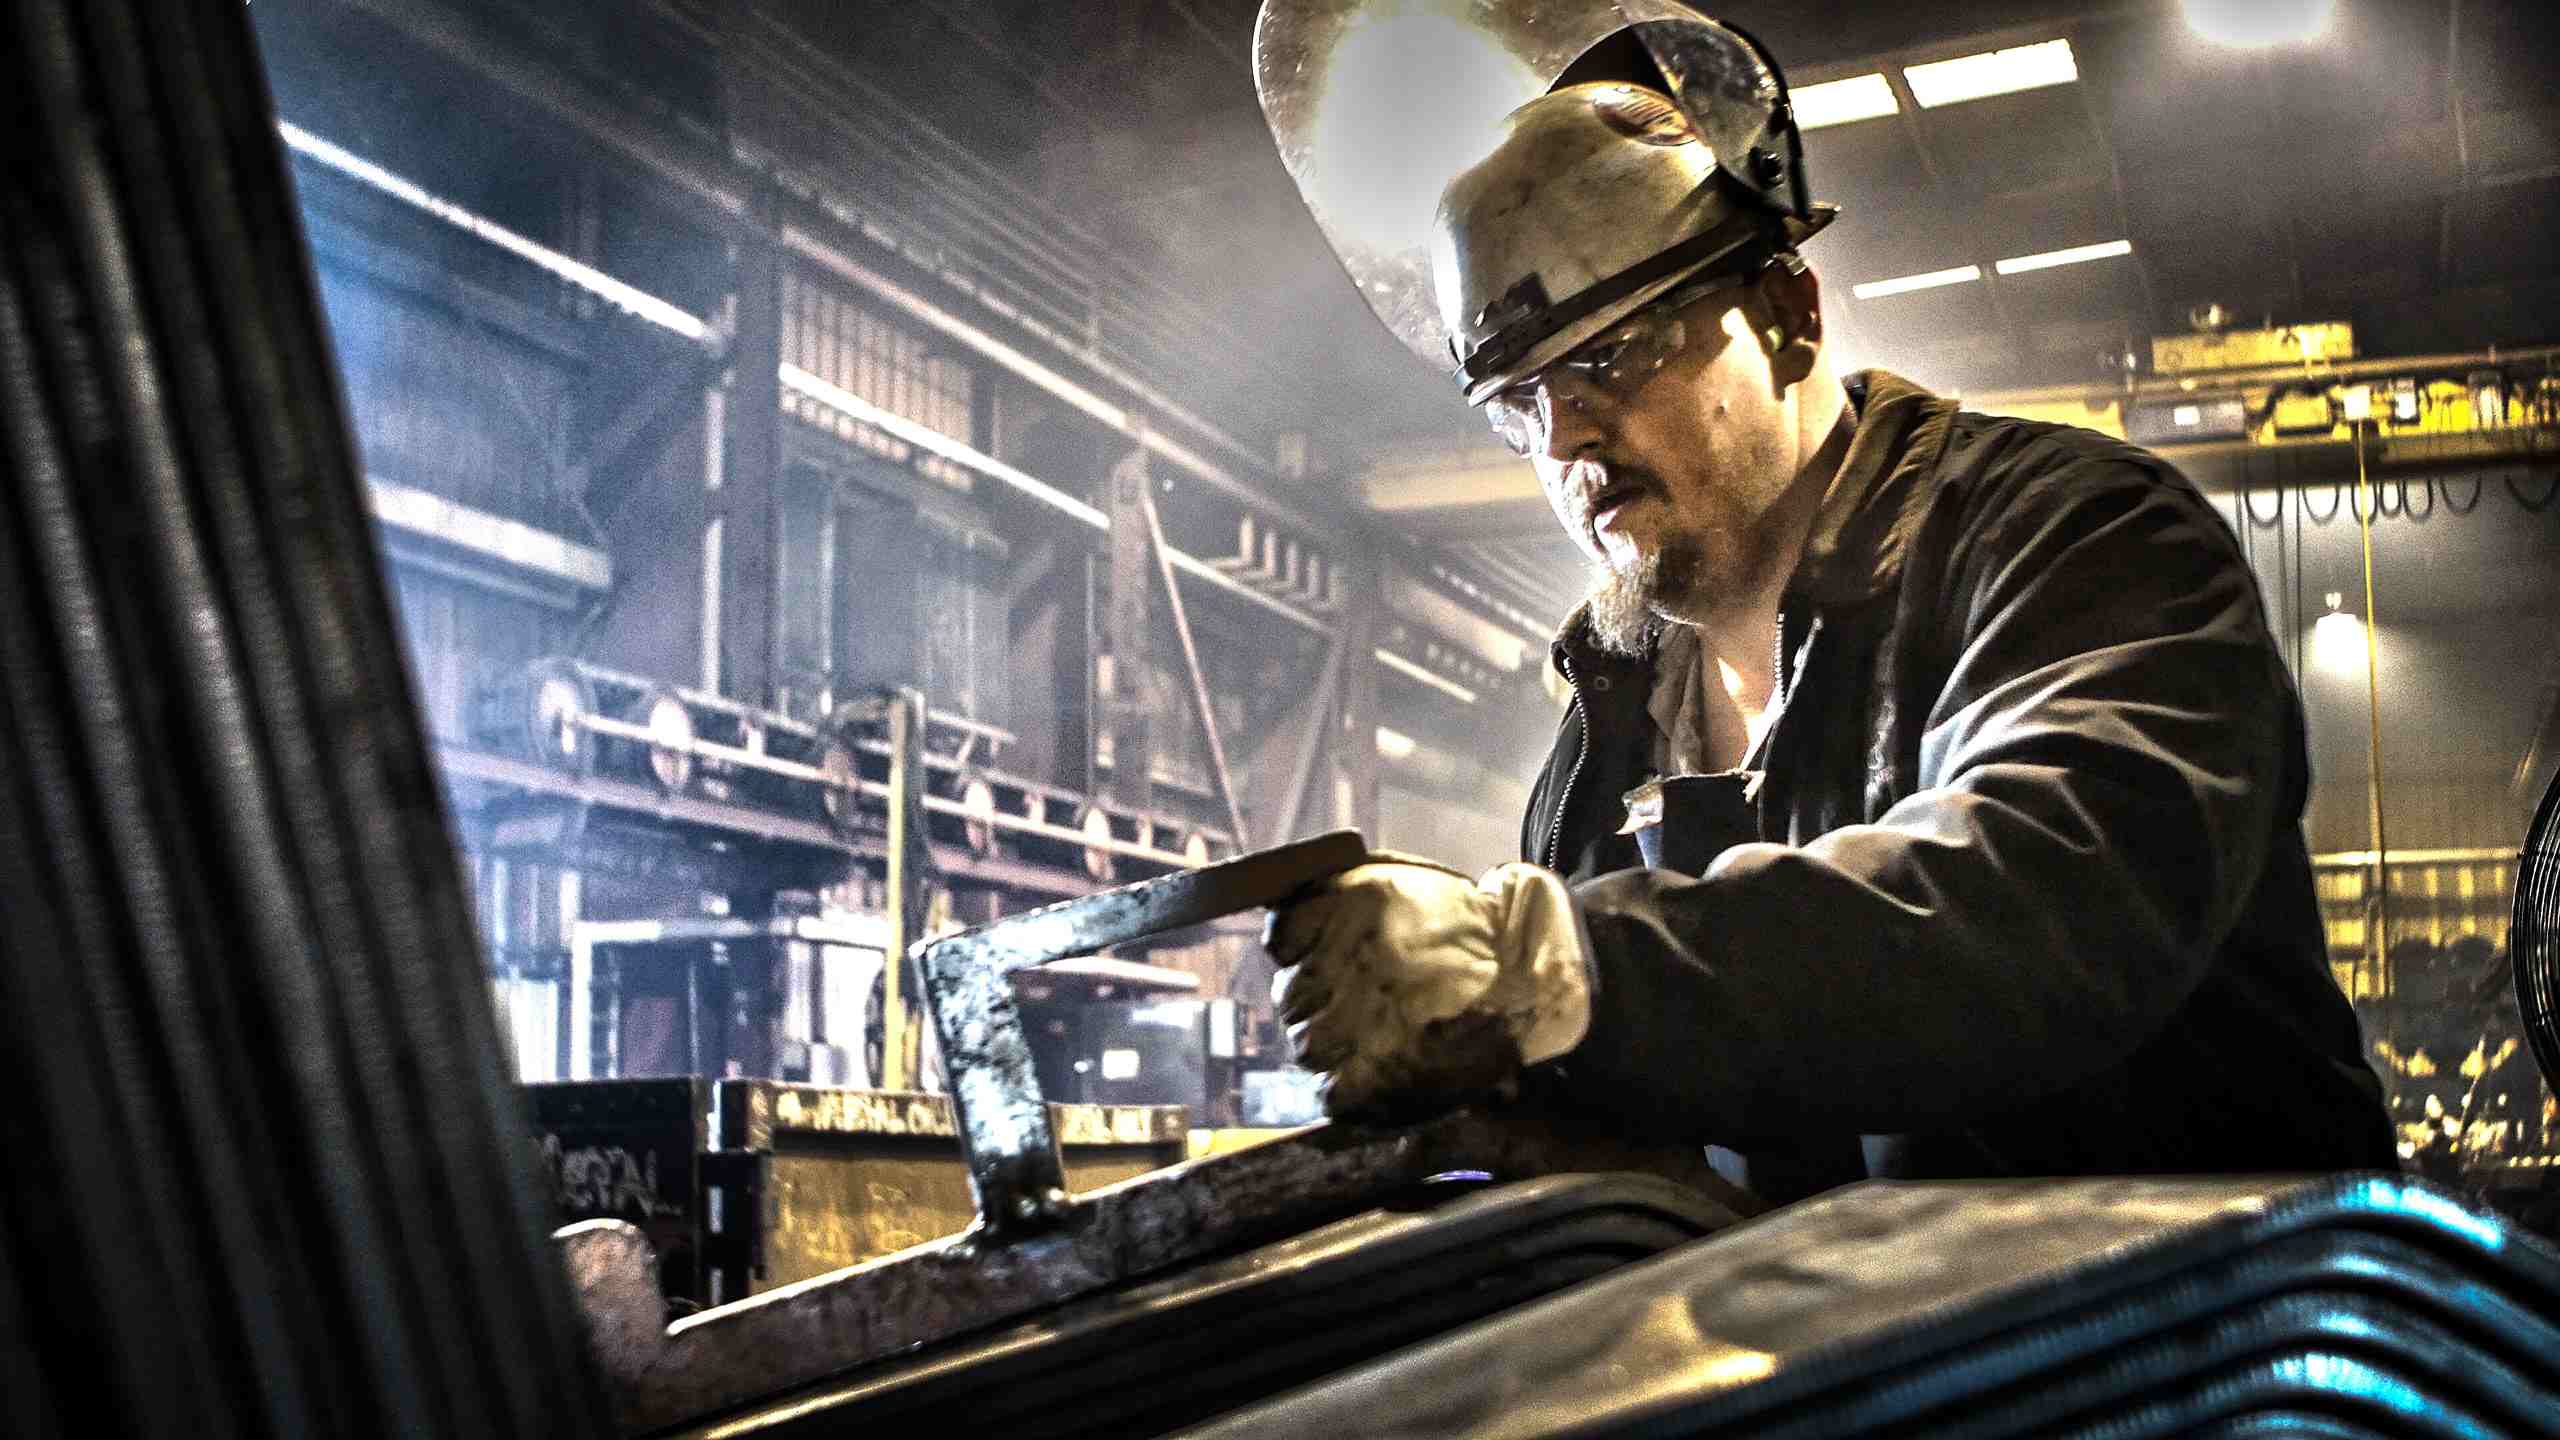 Crafting the Future: Metal-Fabrication Worker at Railcar Manufacturing Plant"